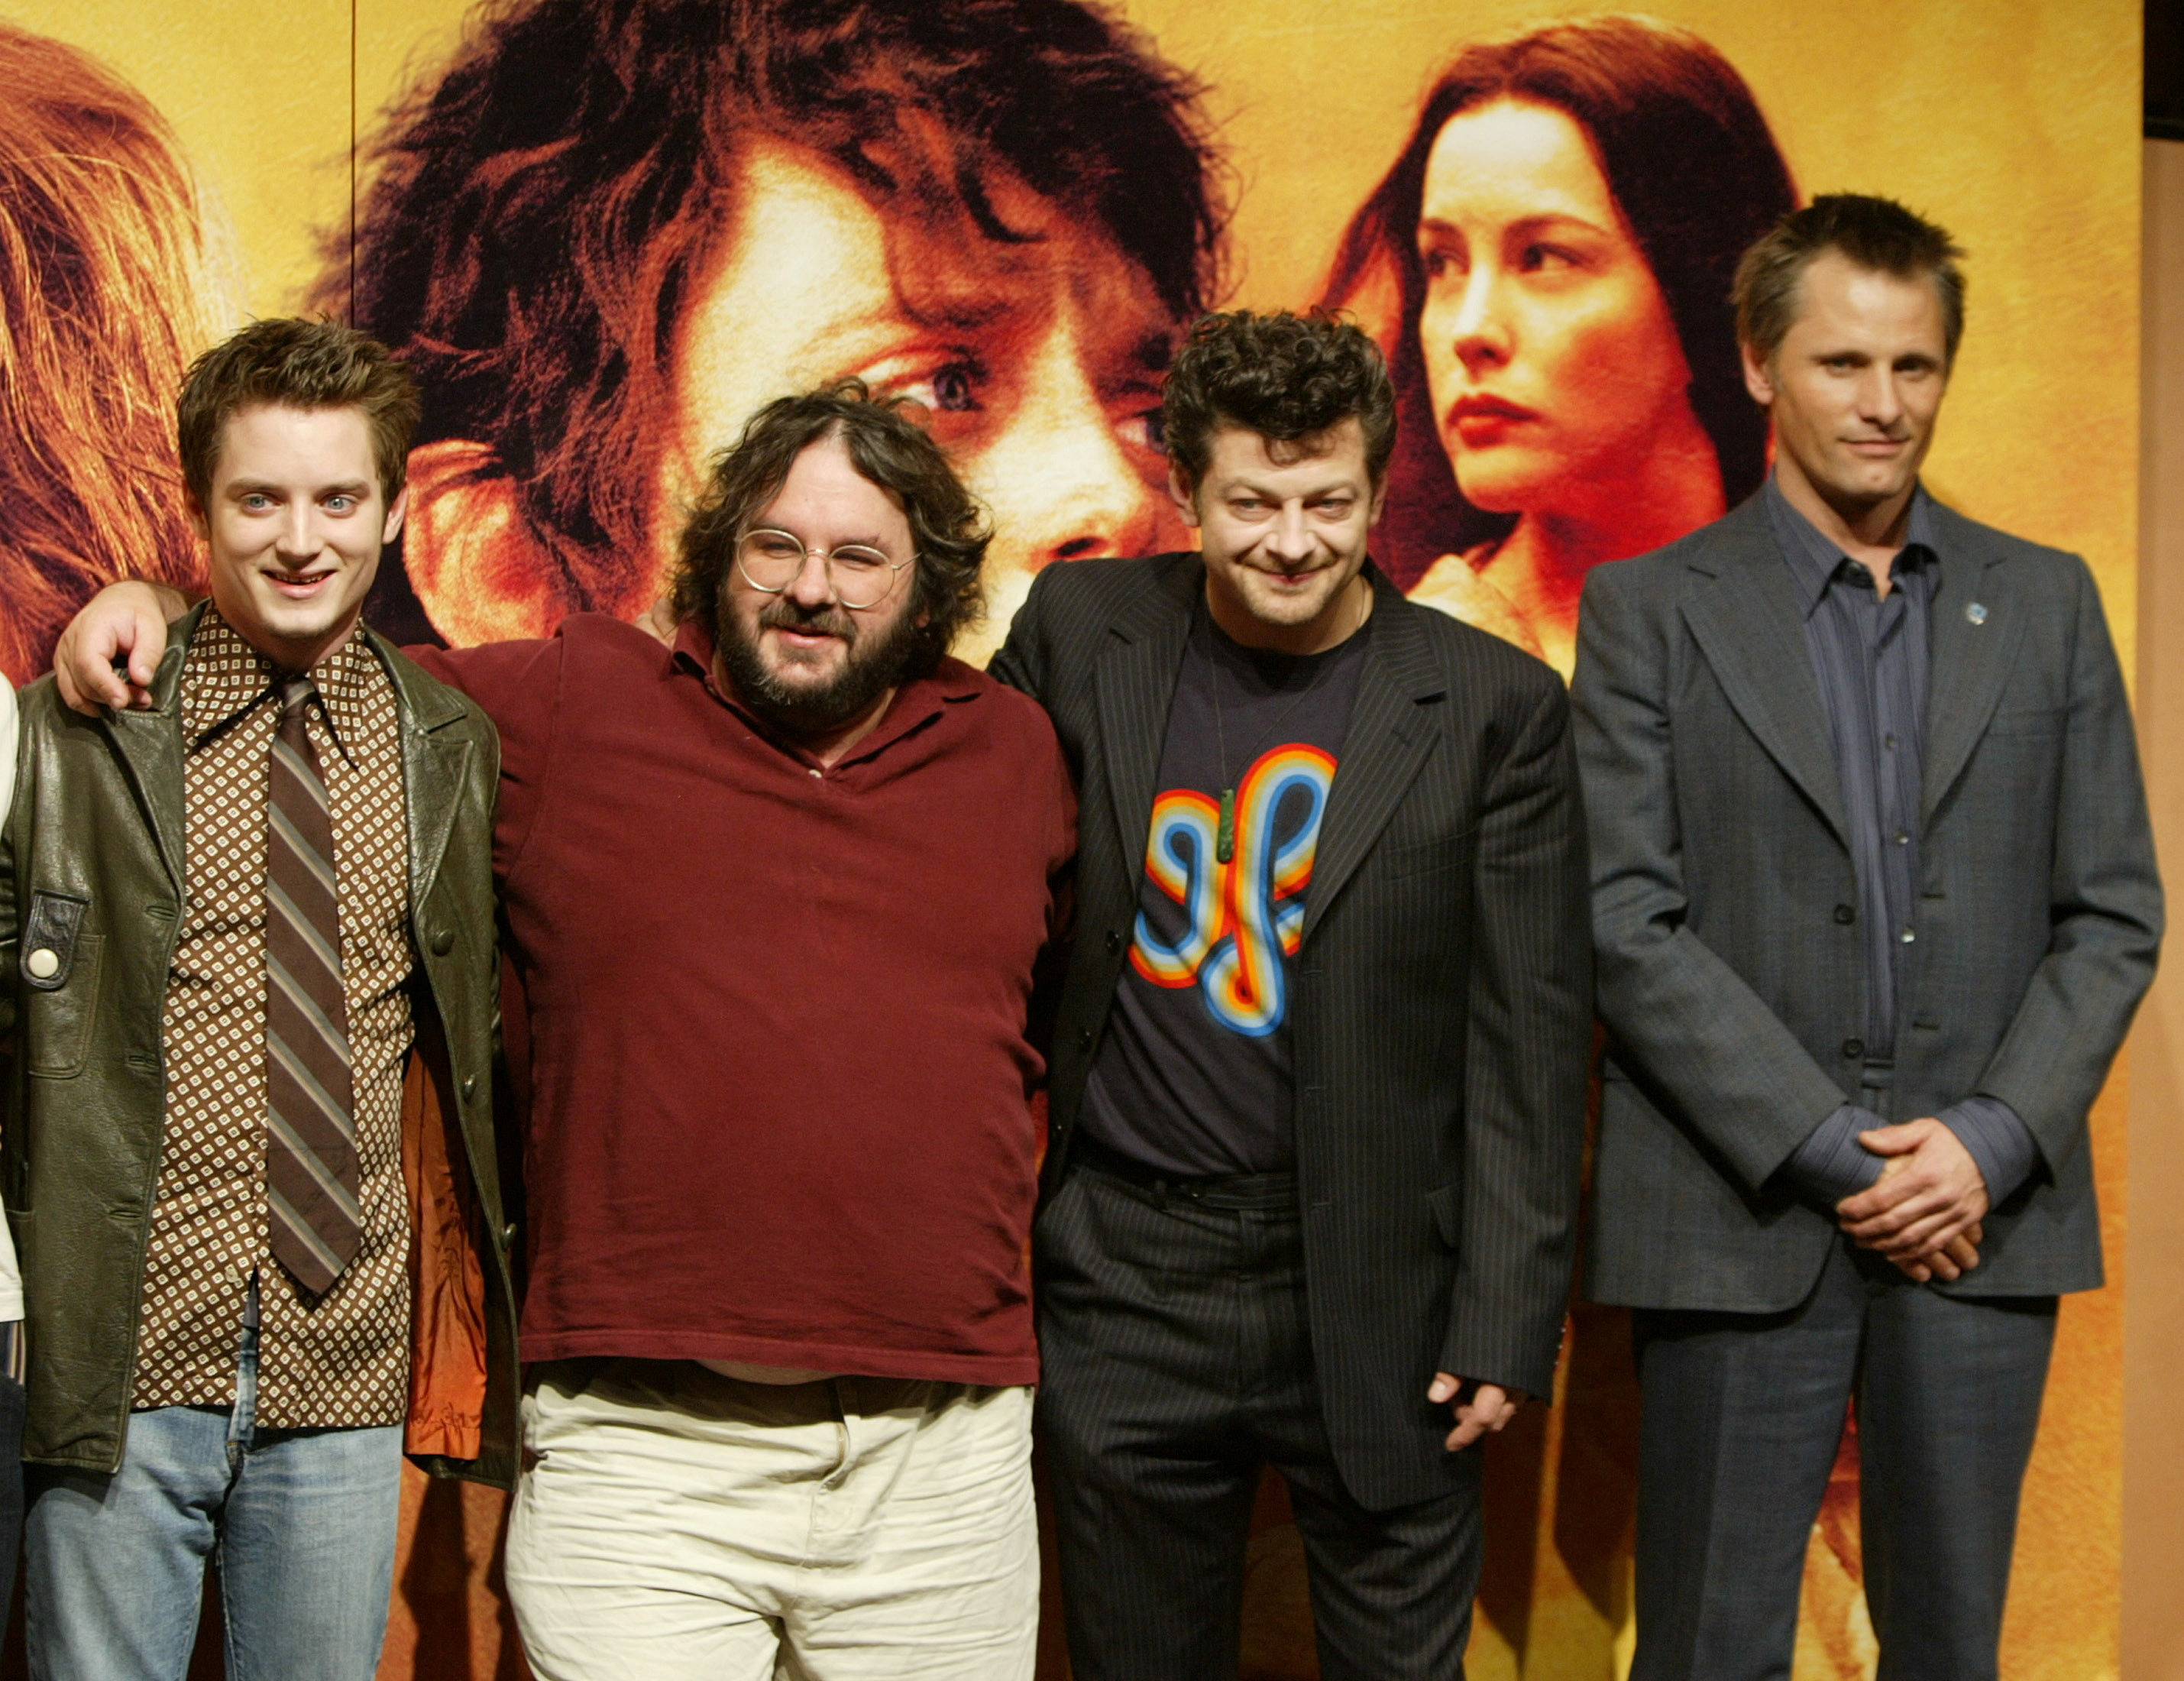 CAST MEMBERS AND DIRECTOR OF 'LORD OF THE RINGS - THE RETURN OF THE KING' POSE IN TOKYO.